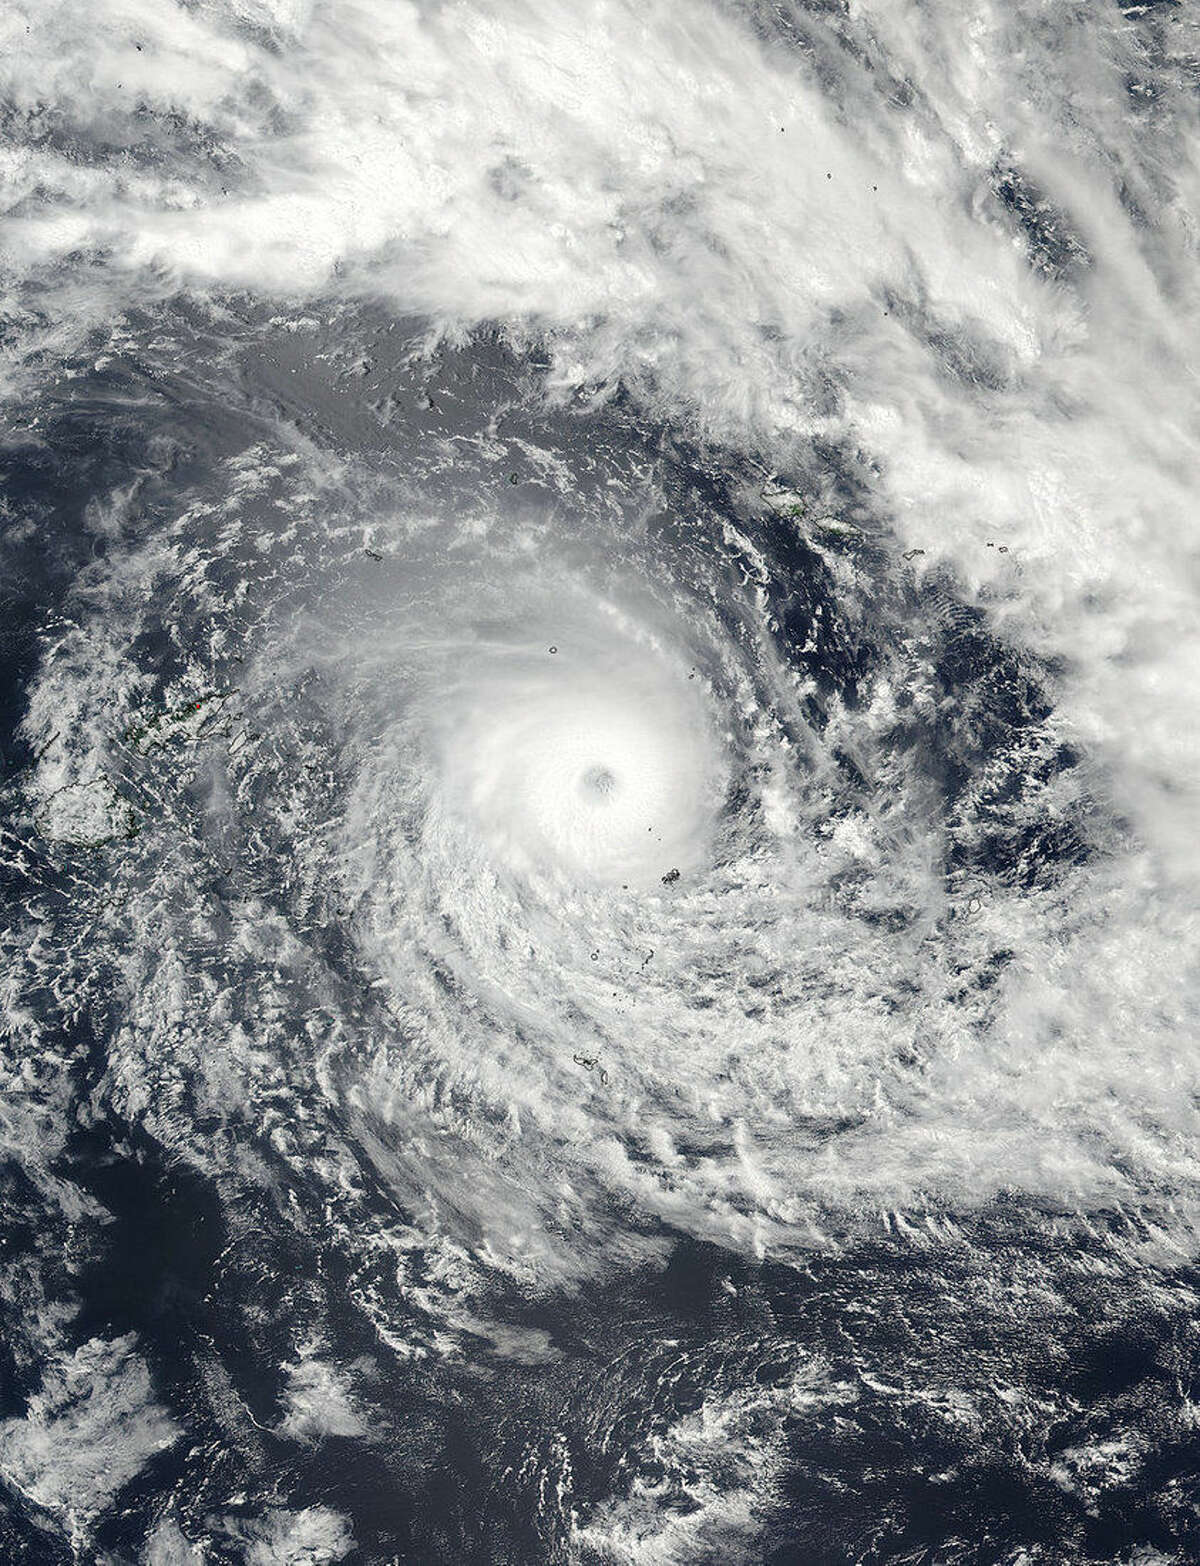 This Feb. 19, 2016, satellite image released by NASA Goddard Rapid Response shows Cyclone Winston in the South Pacific Ocean. The Pacific island nation of Fiji was hunkering down Saturday as a formidable cyclone with winds of 300 kilometers (186 miles) per hour bore down. (NASA Goddard Rapid Response/NOAA via AP)